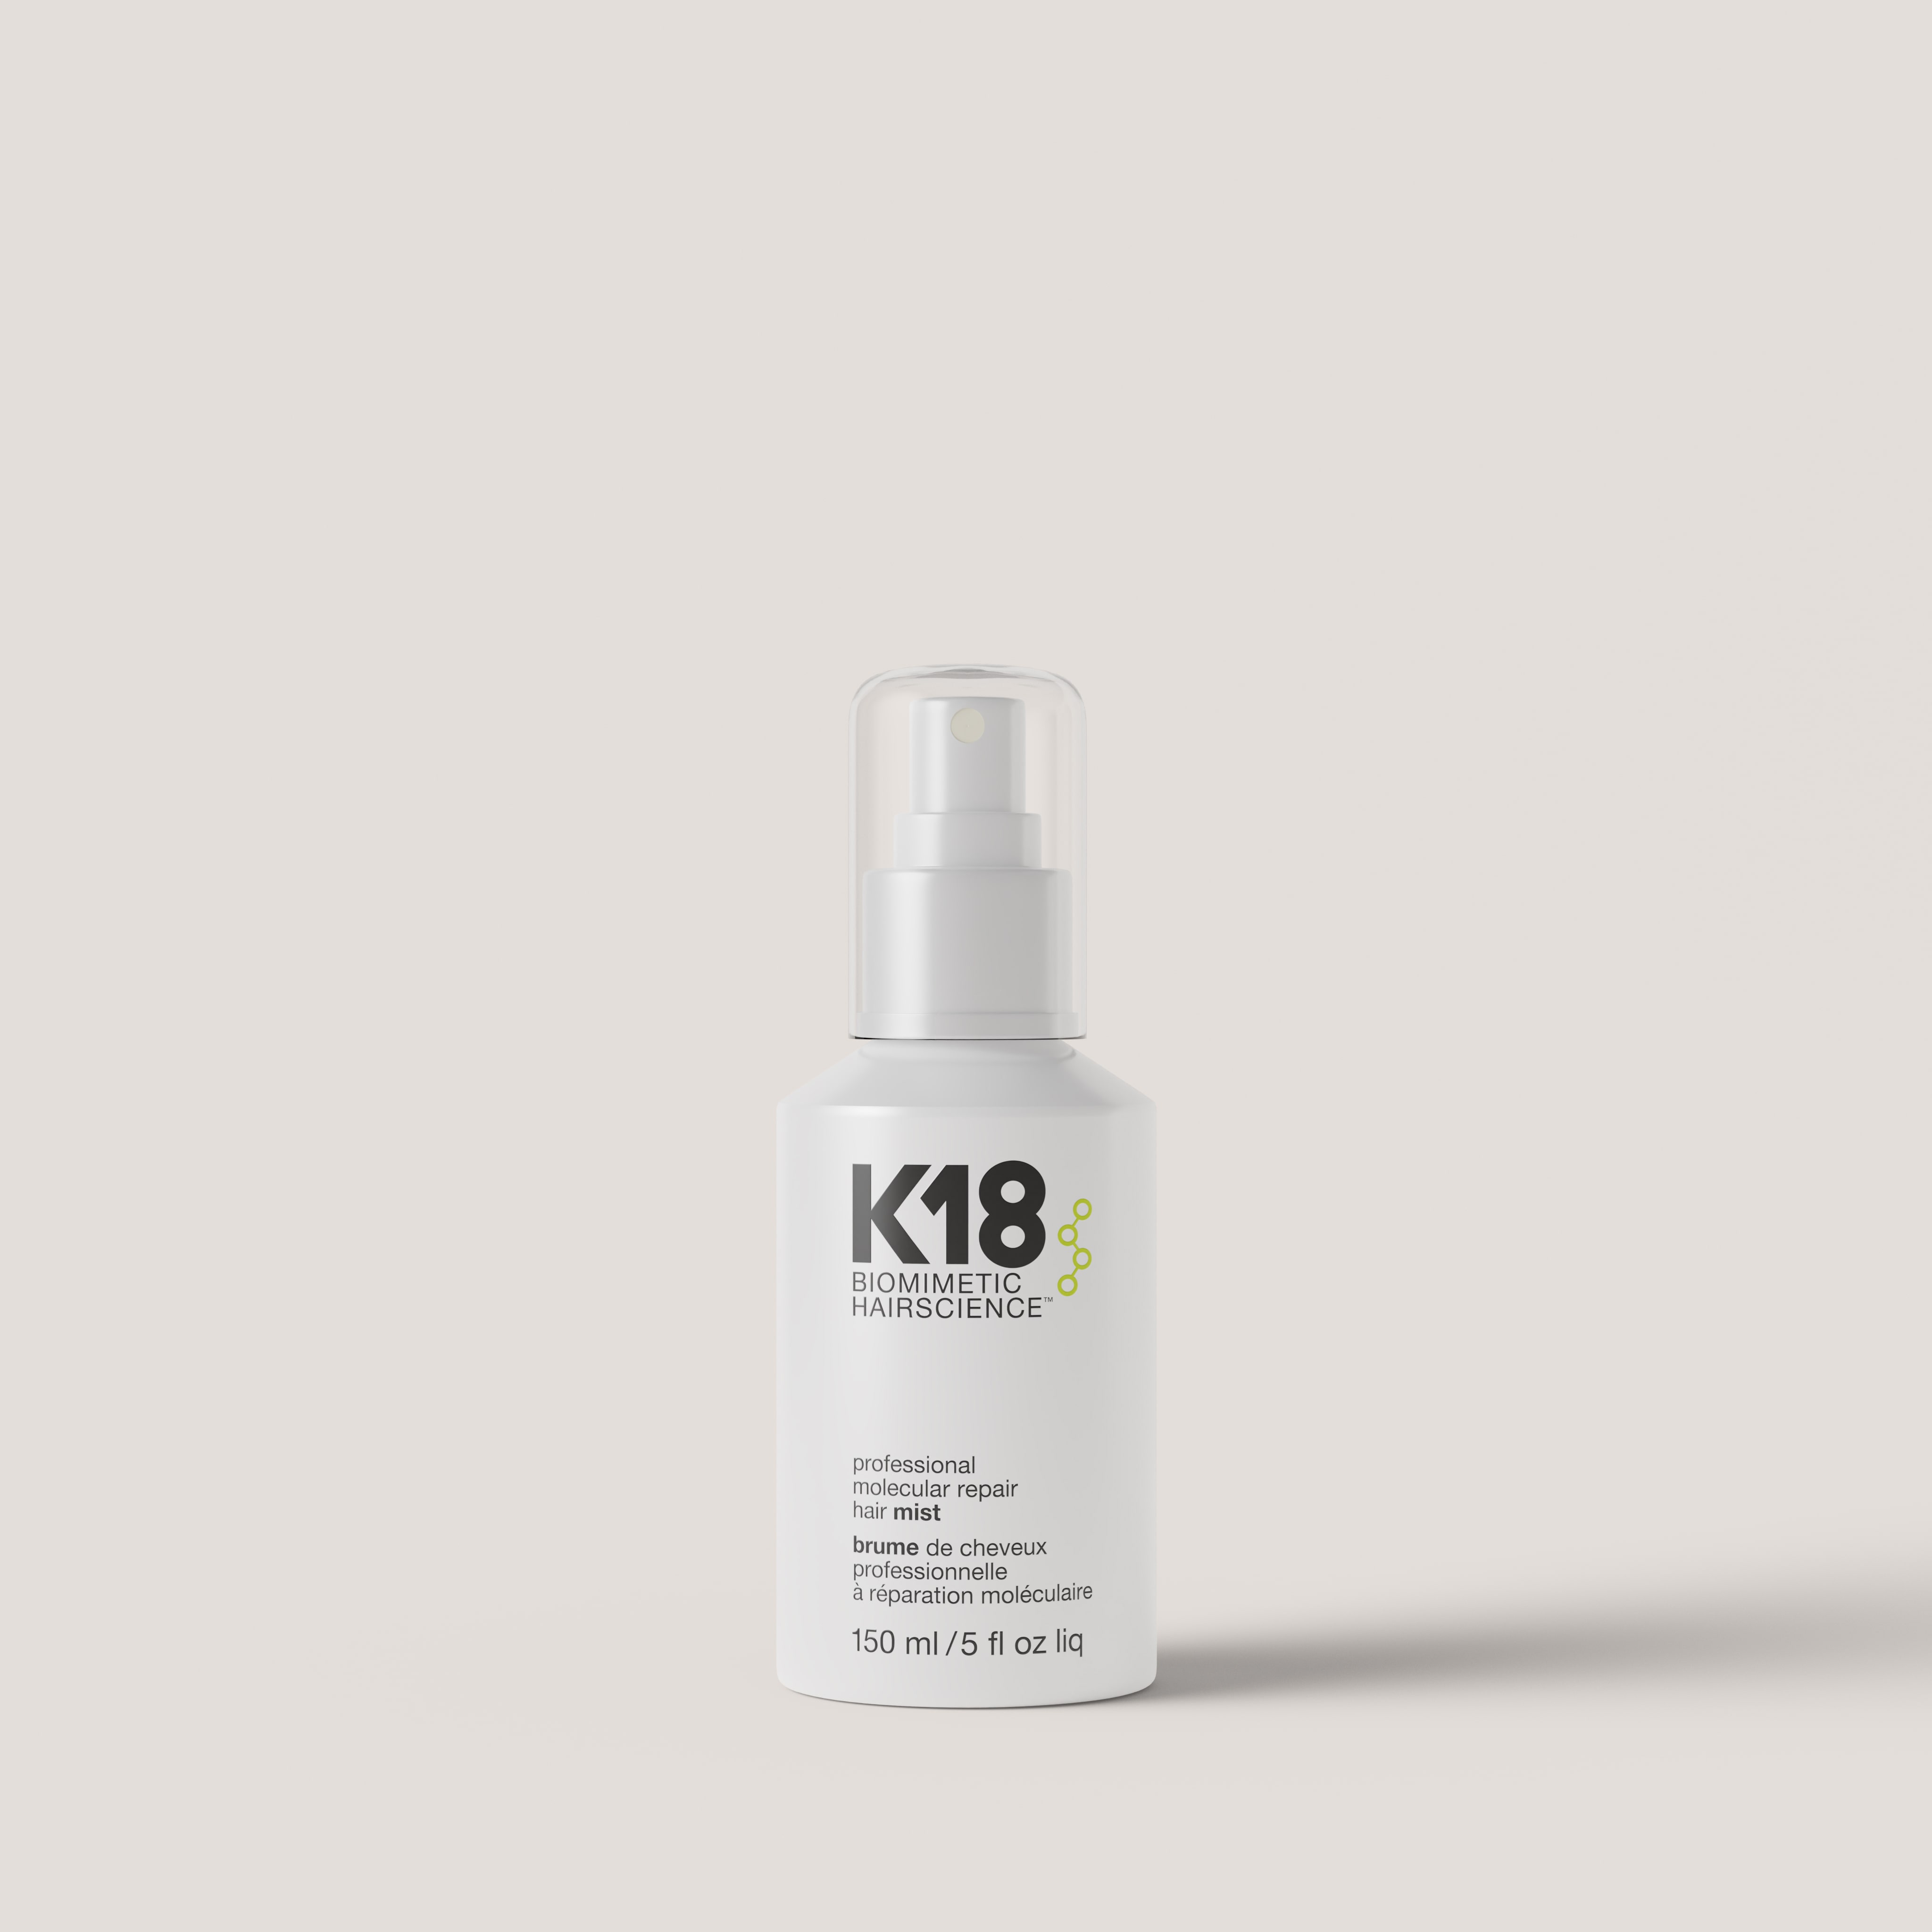 NEW REVOLUTIONORY HAIR CARE BRAND K18 LAUNCHES IN INDIA